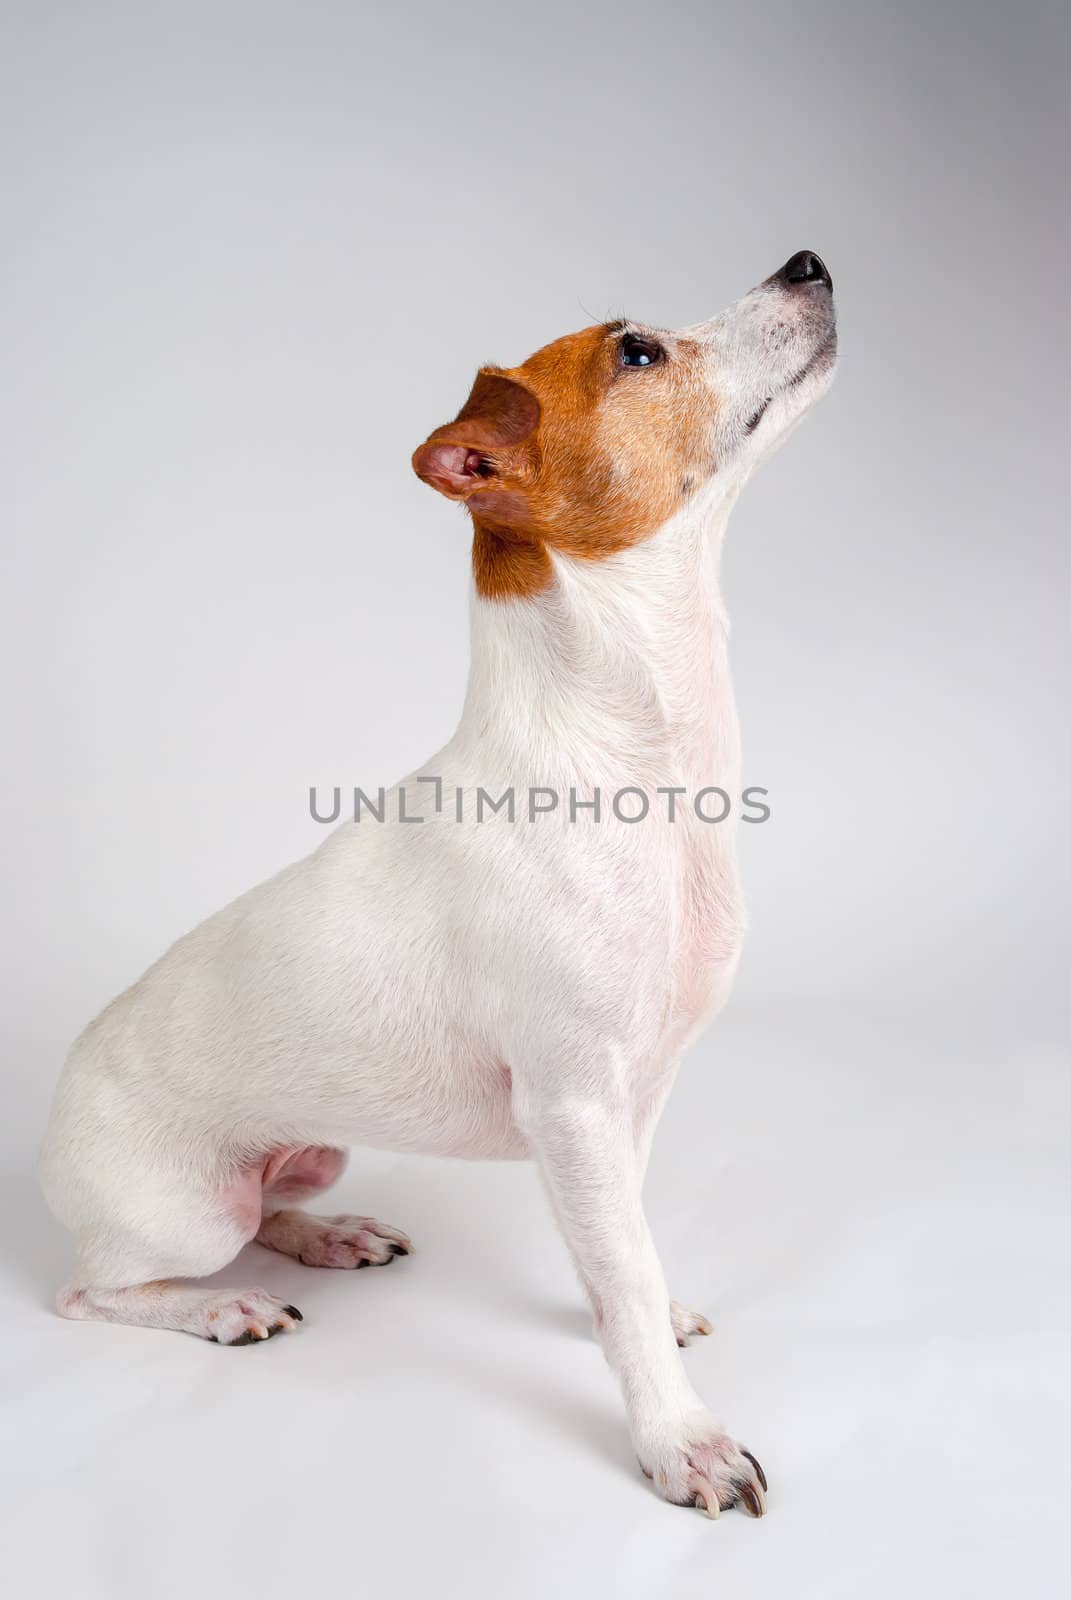 Obedient Jack Russell Terrier in Profile by oliverjw